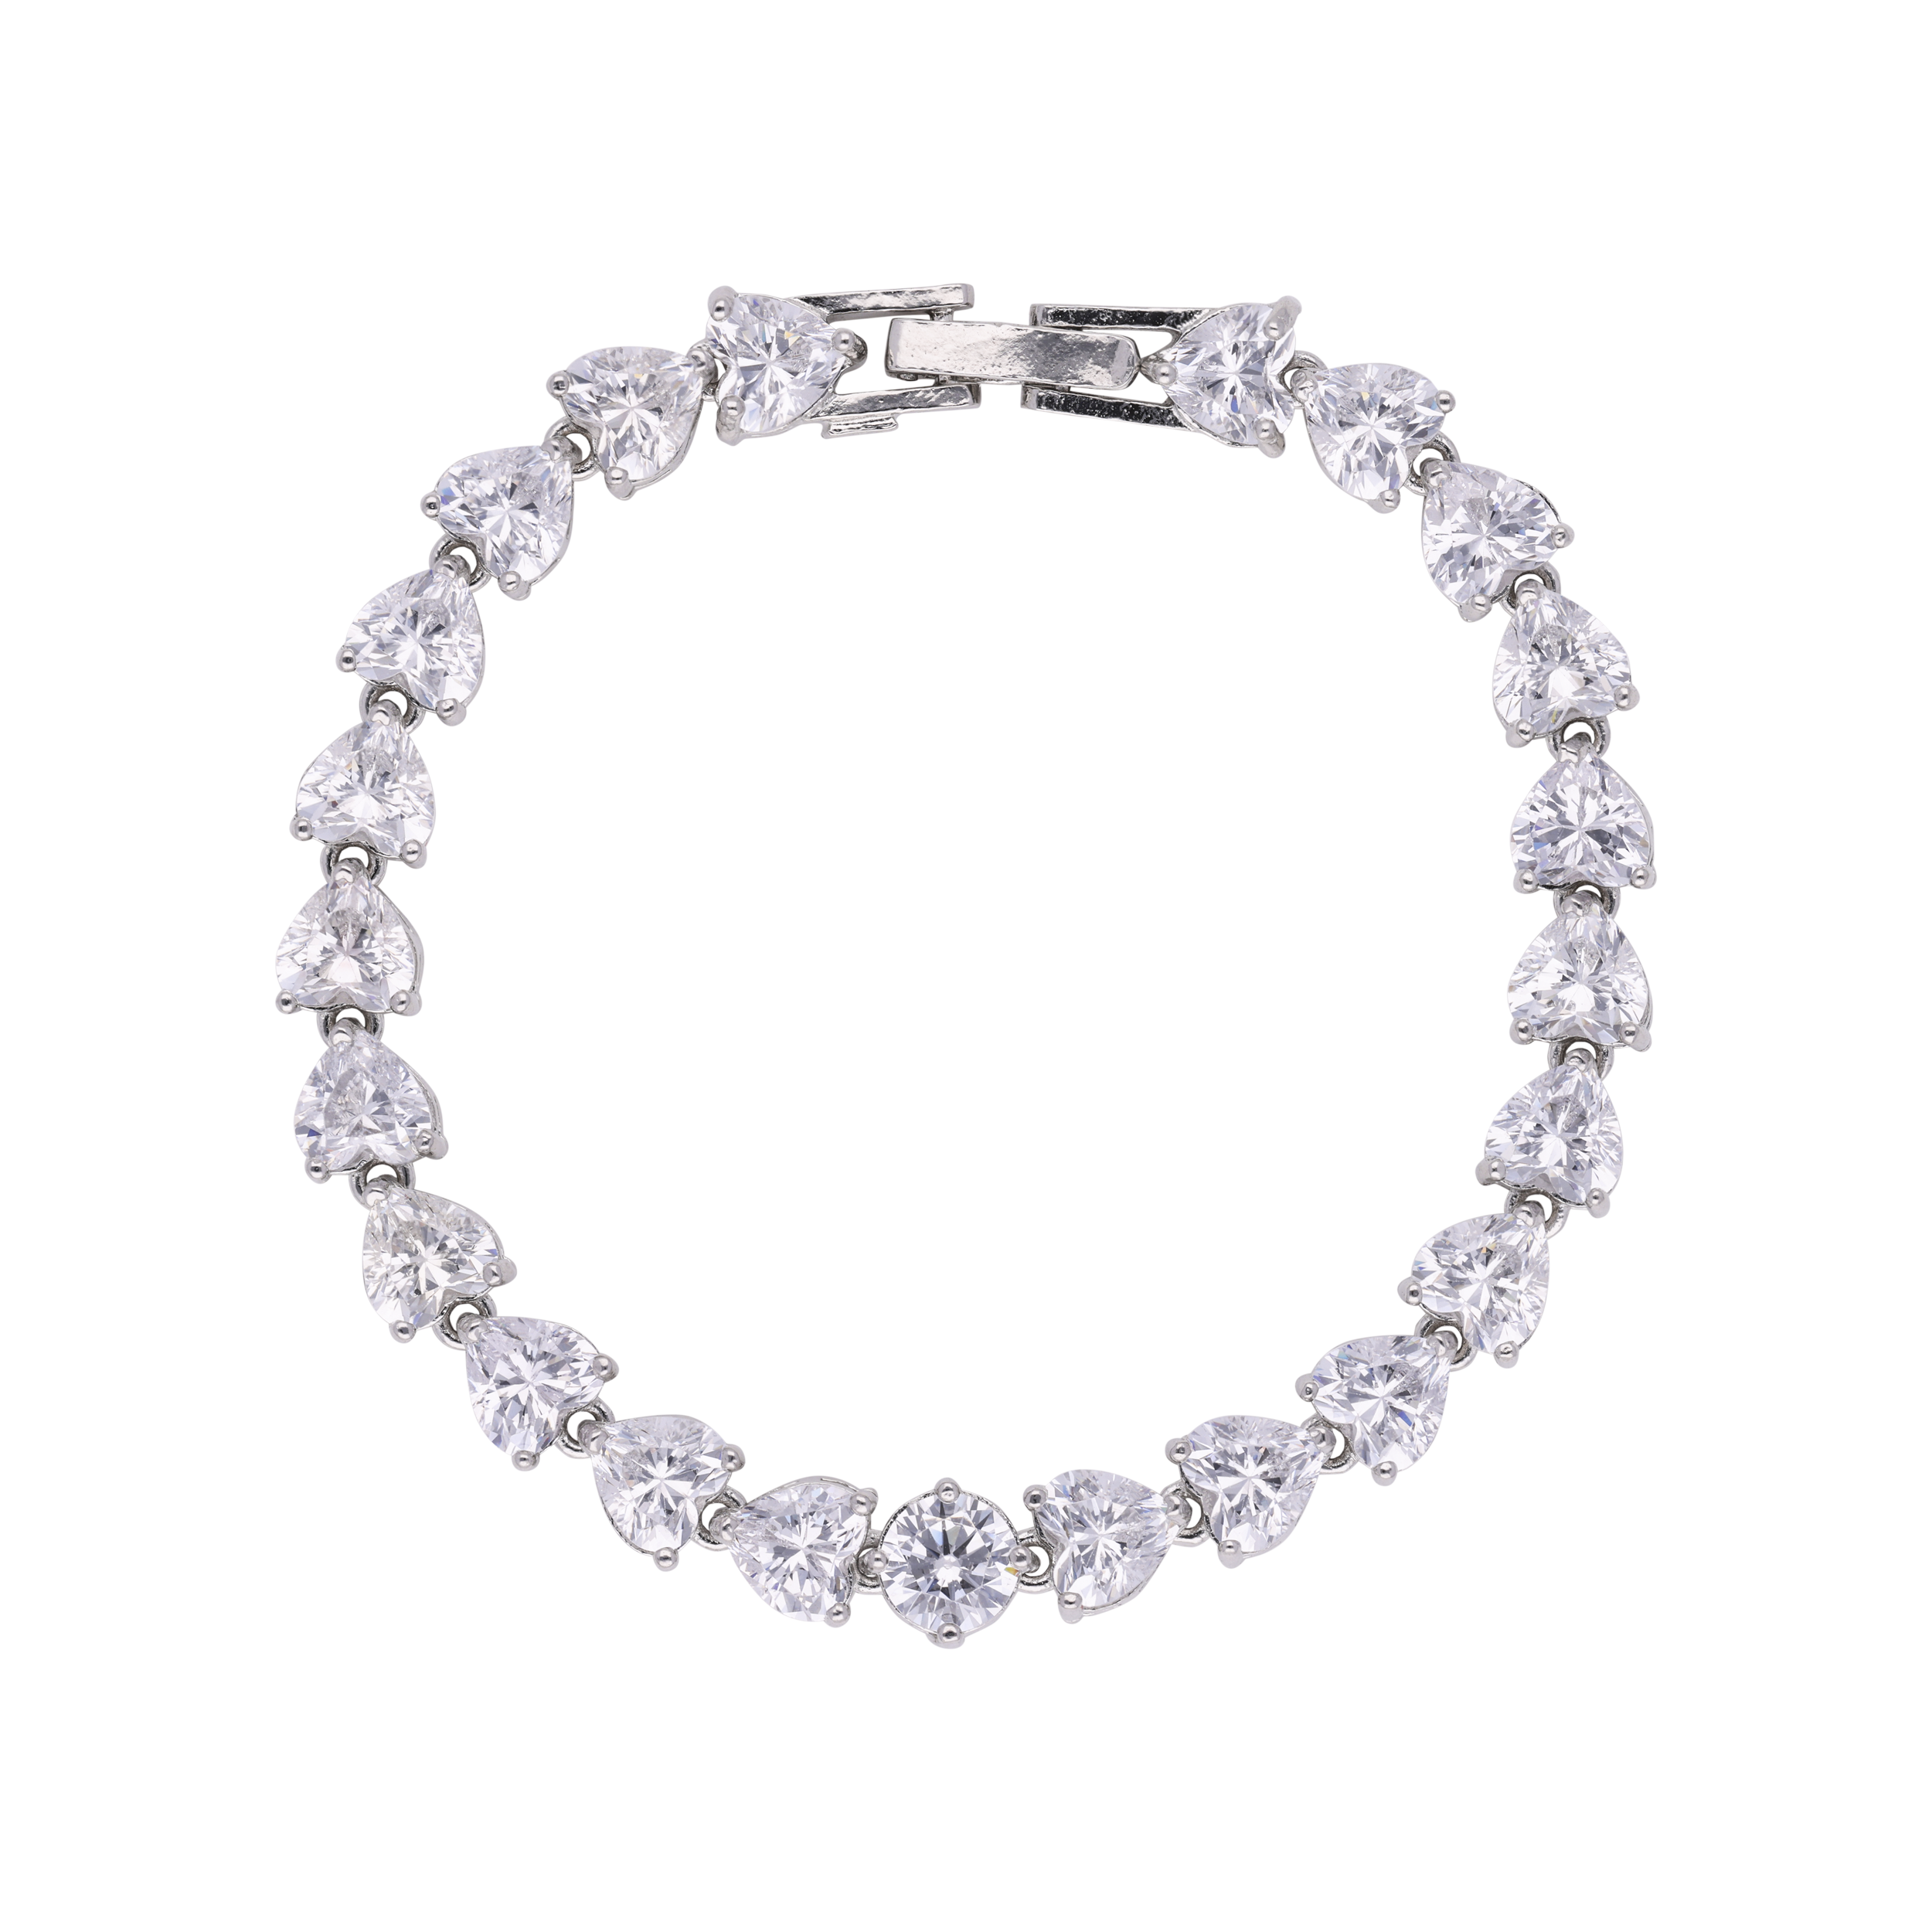 Sterling Silver Flexible Bracelet with Heart Shaped Solitaire Cubic Zirconia | SKU : 0020289959 ,0020289935, 0020289942, 0020289997